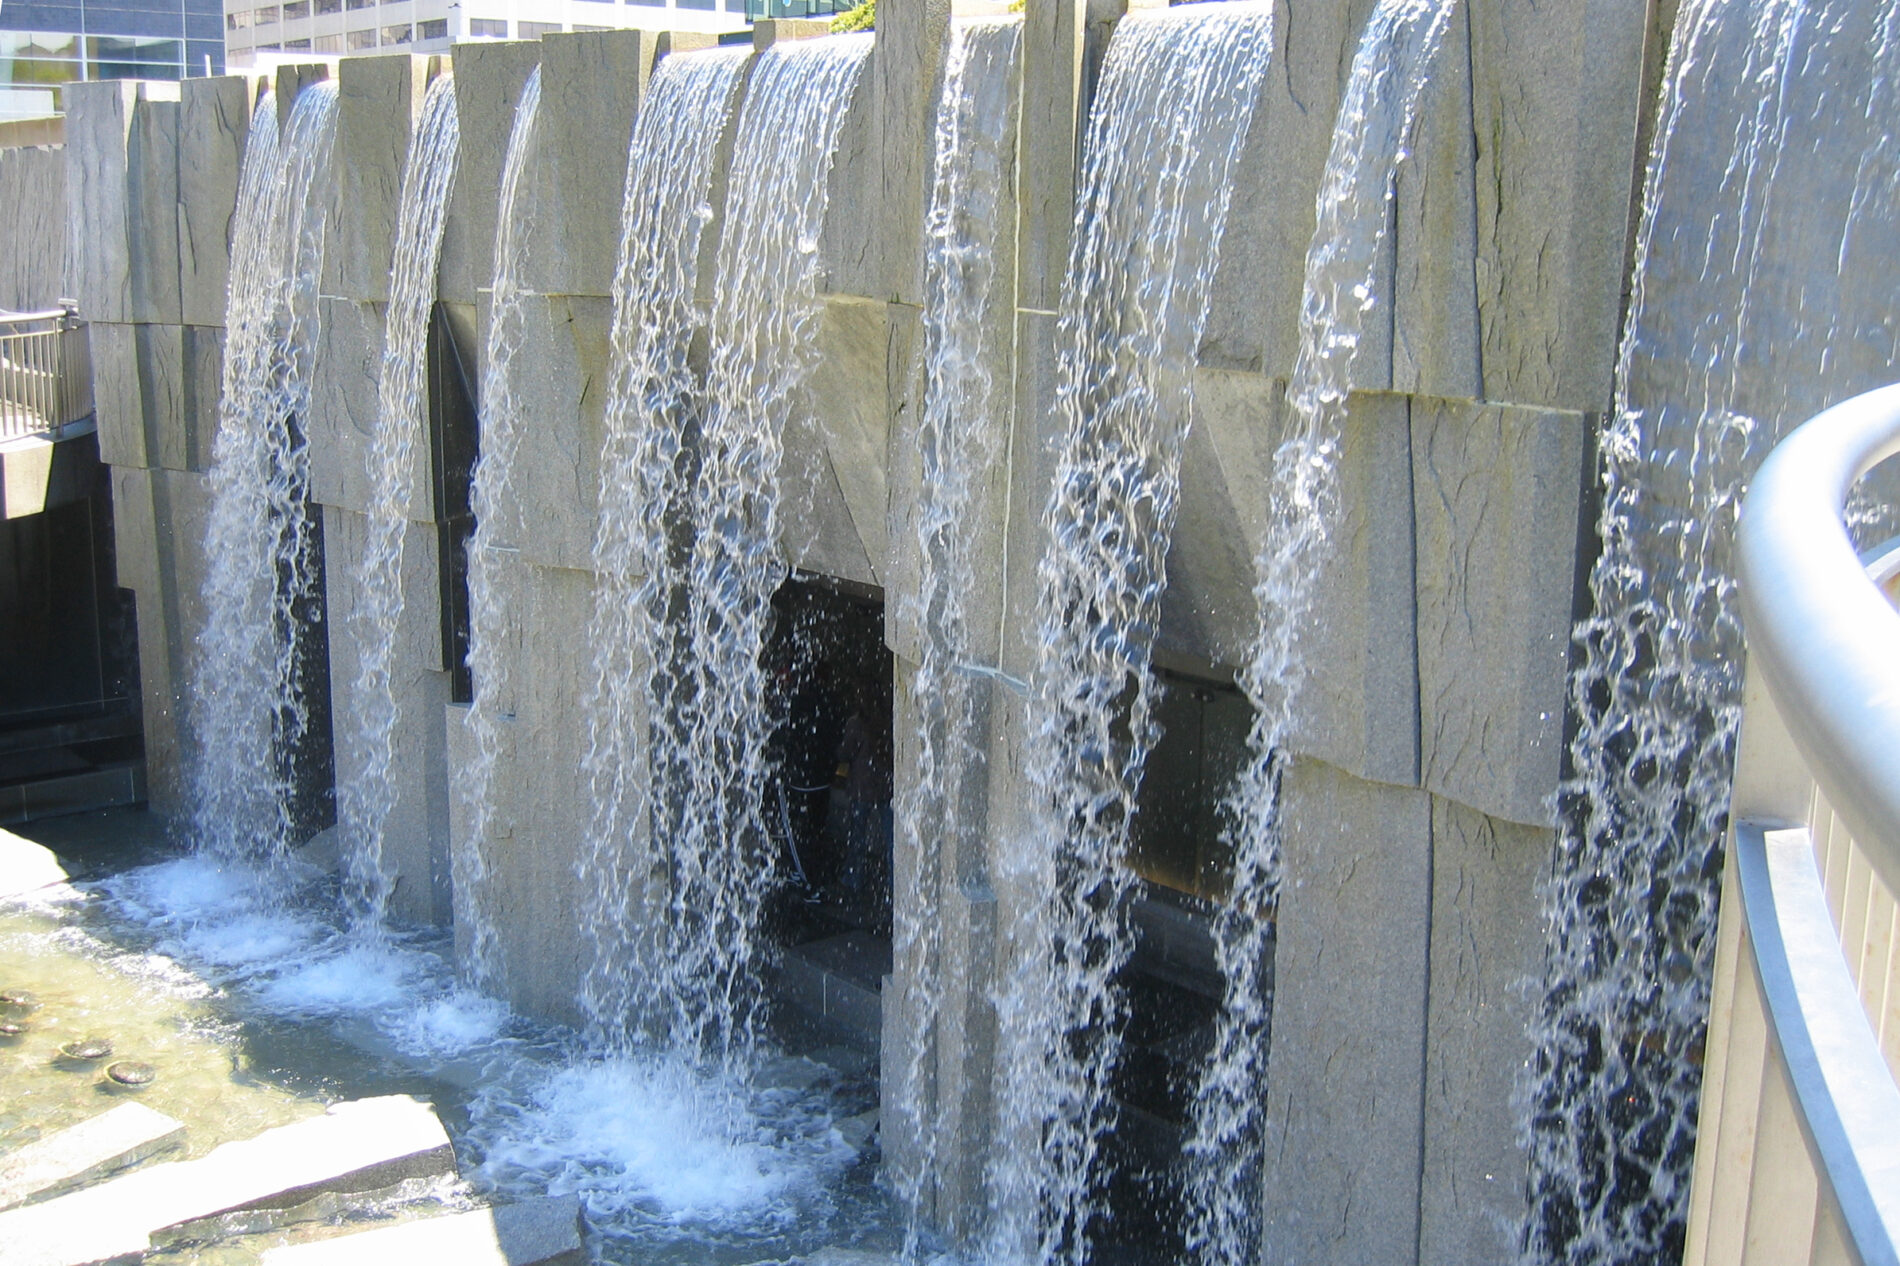 Waterfall memorial to Doctor Martin Luther King in Yerba Buena Gardens with his vision of peace and unity behind the falls.